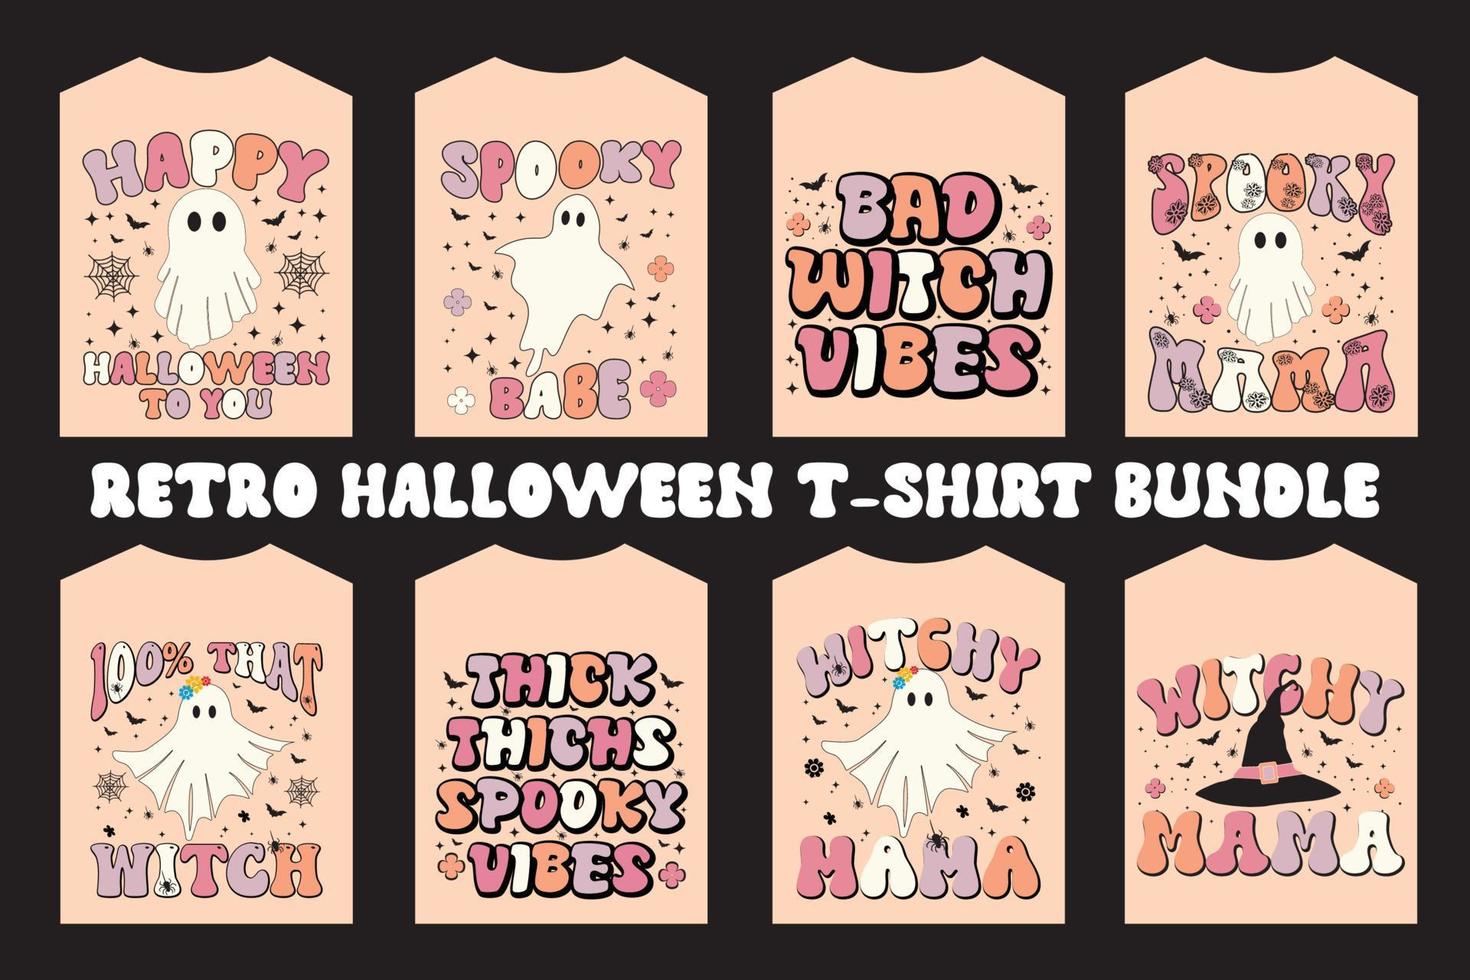 Retro Halloween T-shirt Bundle. Beautiful and eye-catching Halloween vector cartoon-style of ghosts, bats, flowers, witches, and much more.